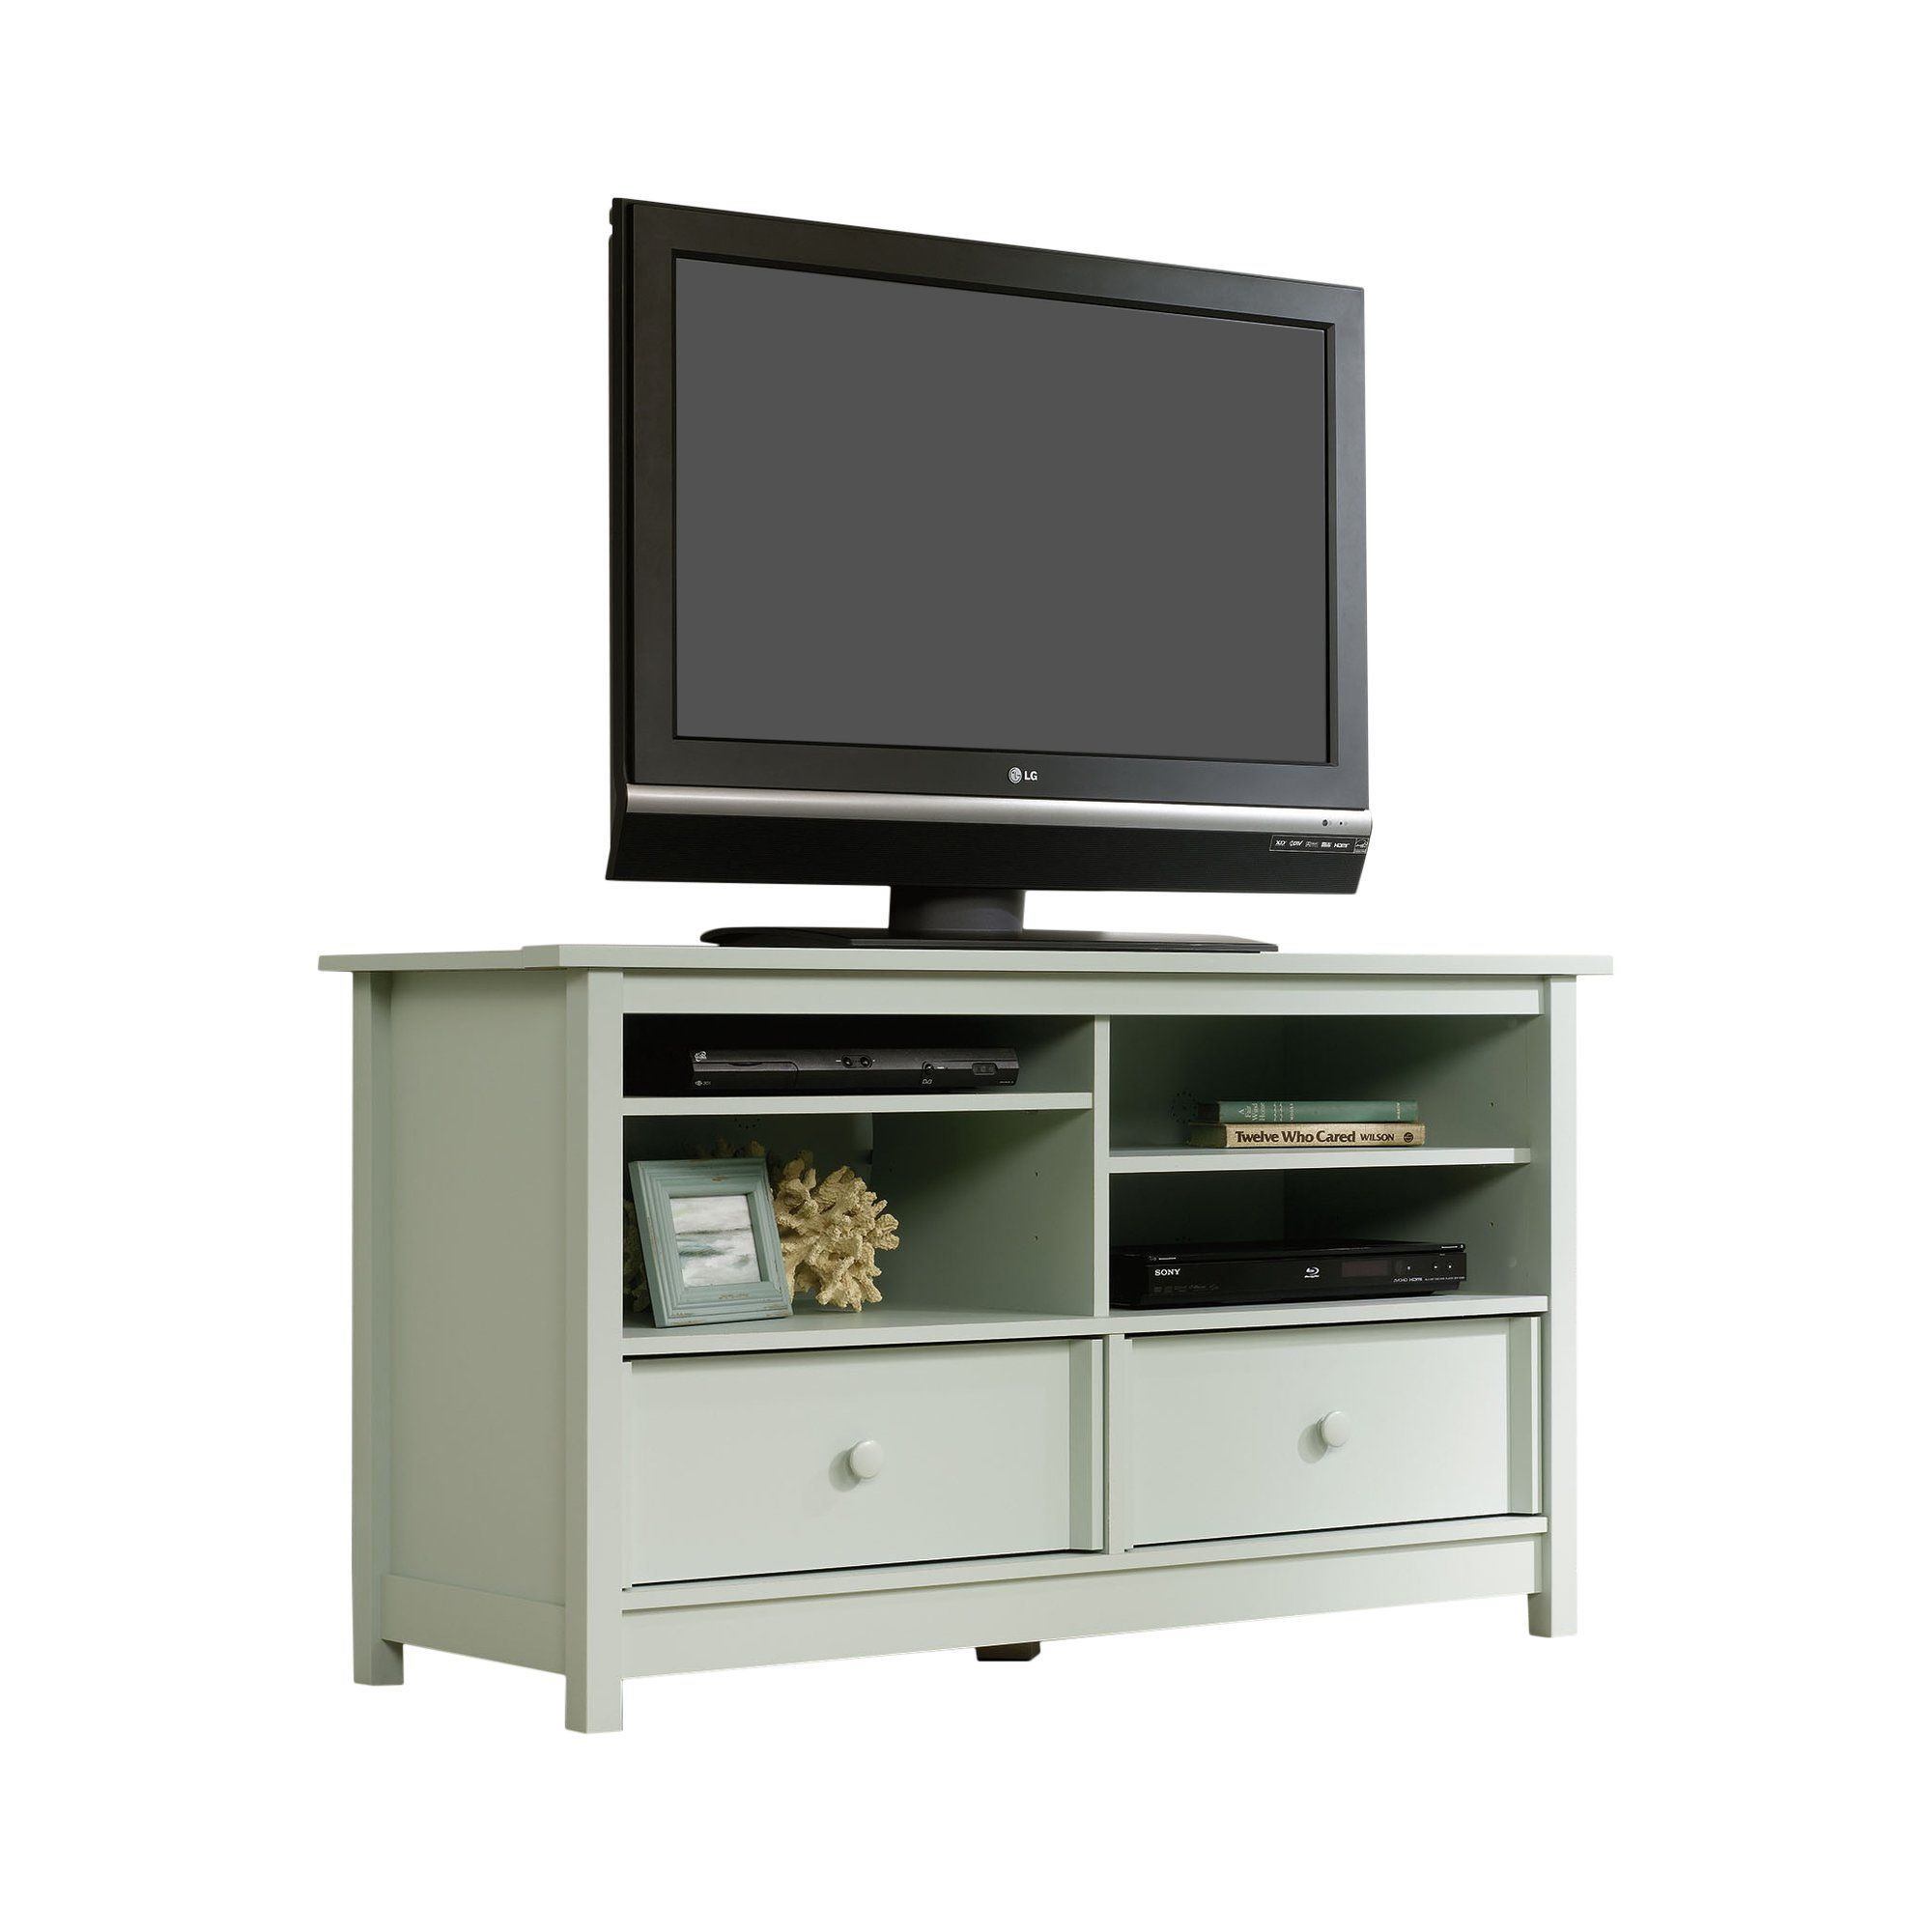 Customer Image Zoomed | Cool Tv Stands, Entertainment Throughout Funky Tv Units (View 7 of 15)